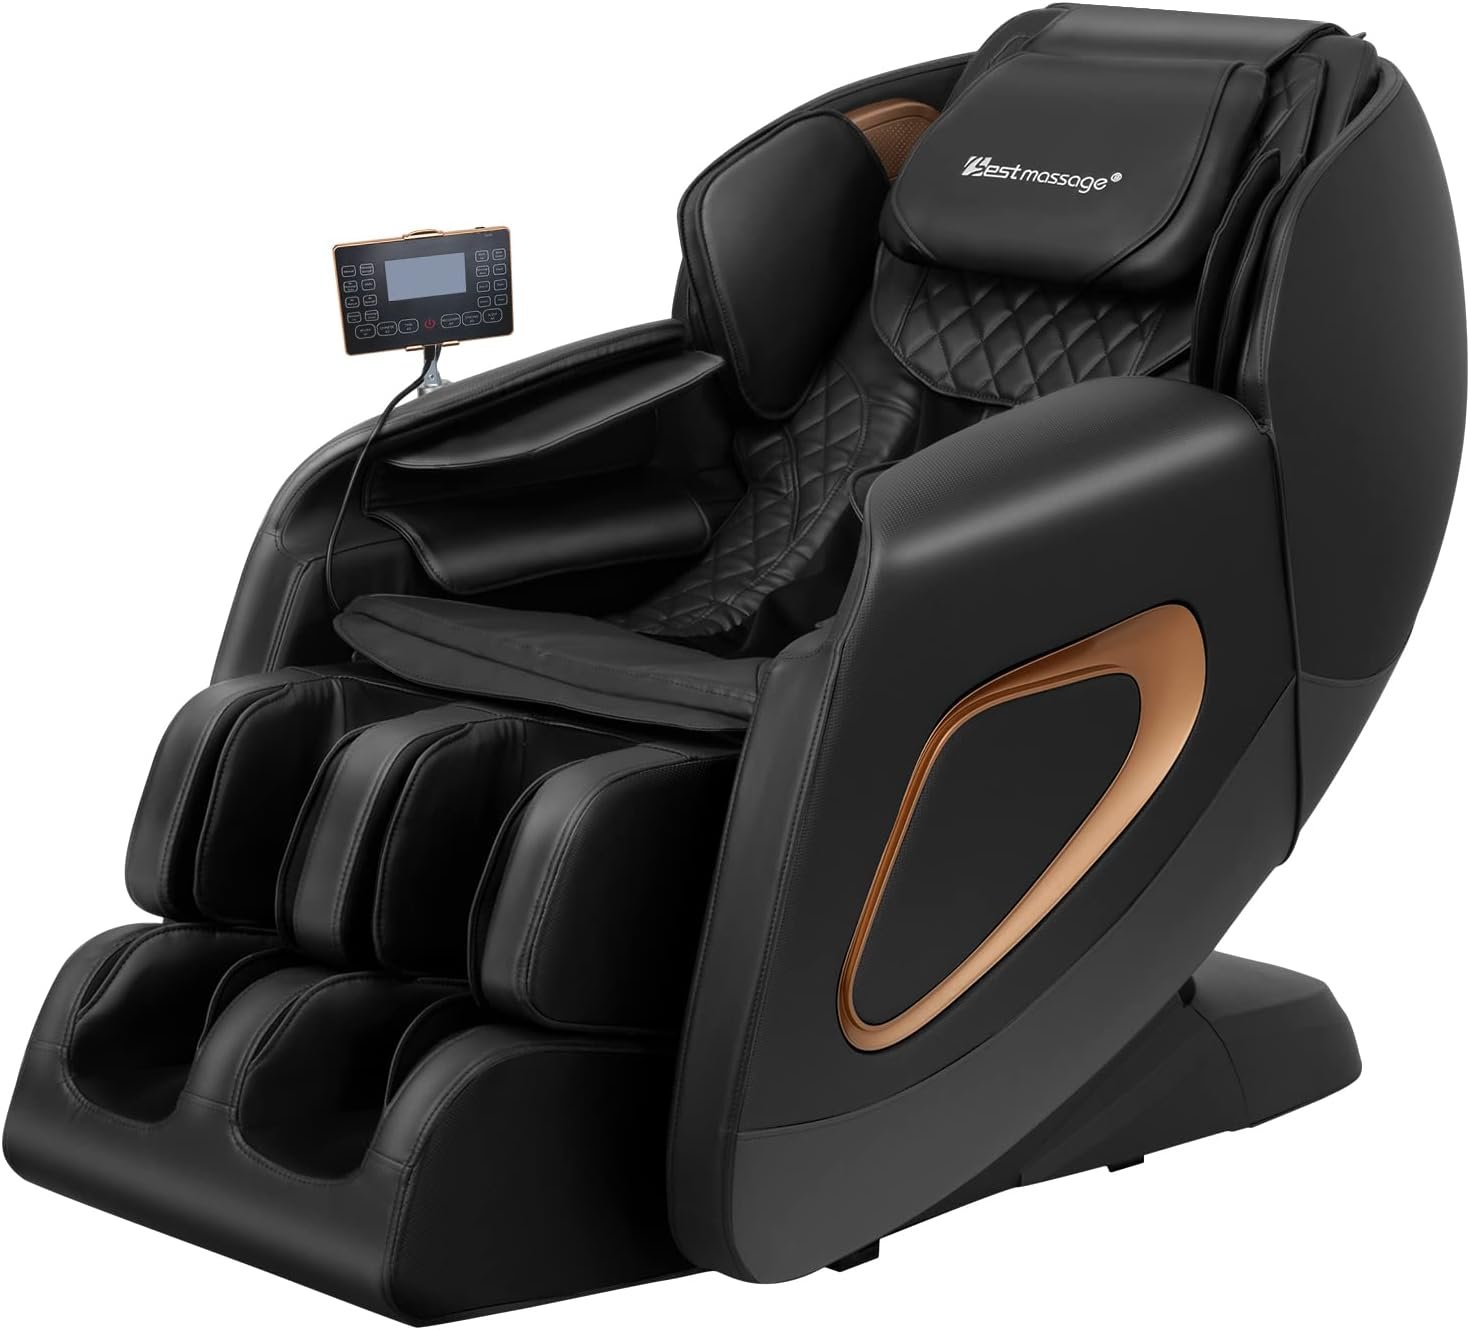 Massage Chair,Full Body Zero Gravity SL Track Massage Chair Recliner Chair with Smart Large Screen Bluetooth Speaker Built-In Heat Therapy Foot Roller Air Massage System for Home Office,Black